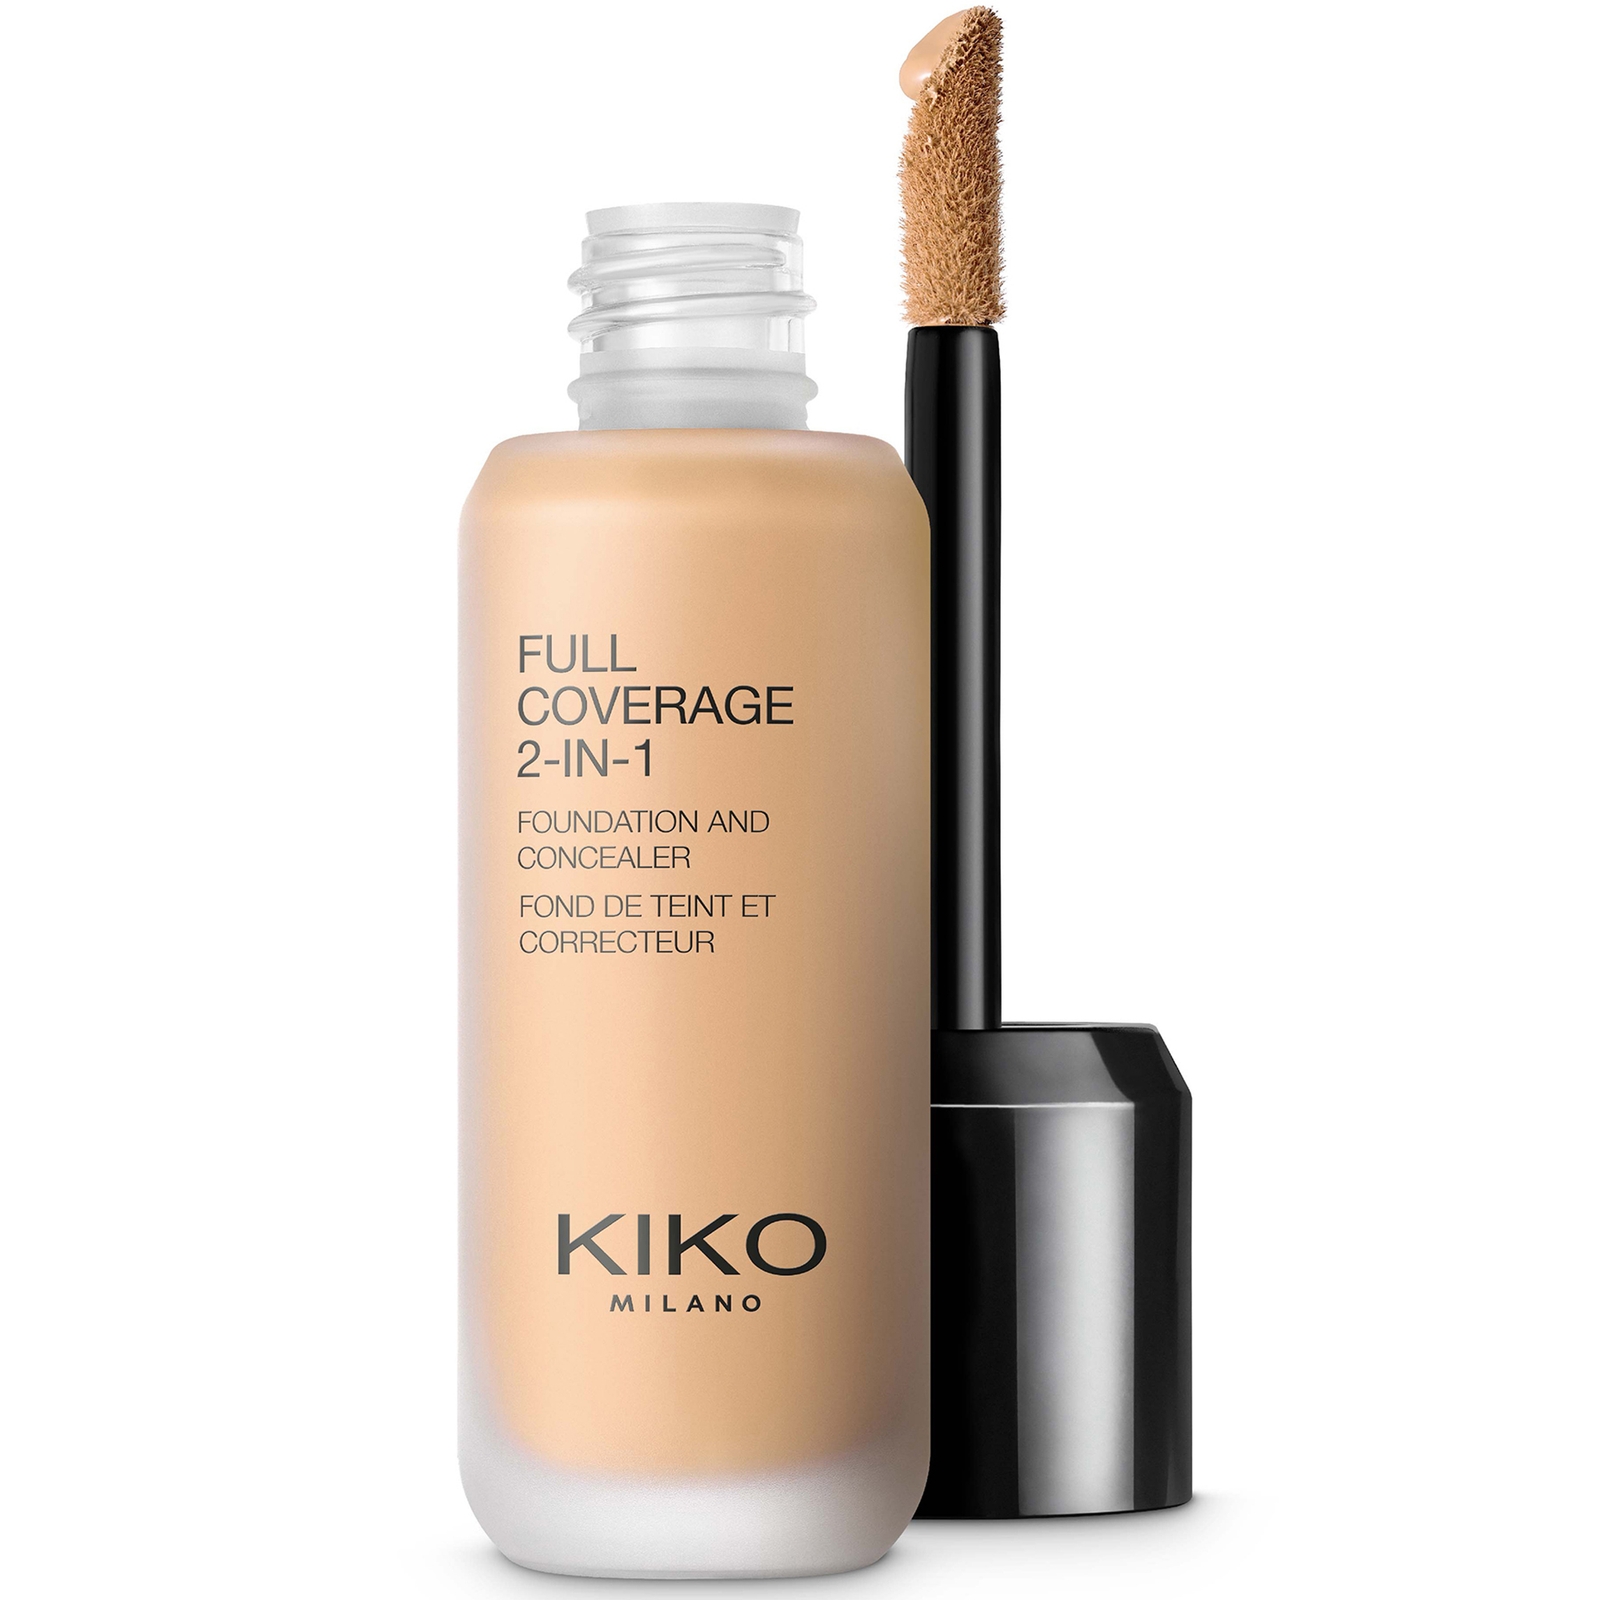 KIKO Milano Full Coverage 2-in-1 Foundation and Concealer 25ml (Various Shades) - 35 Neutral